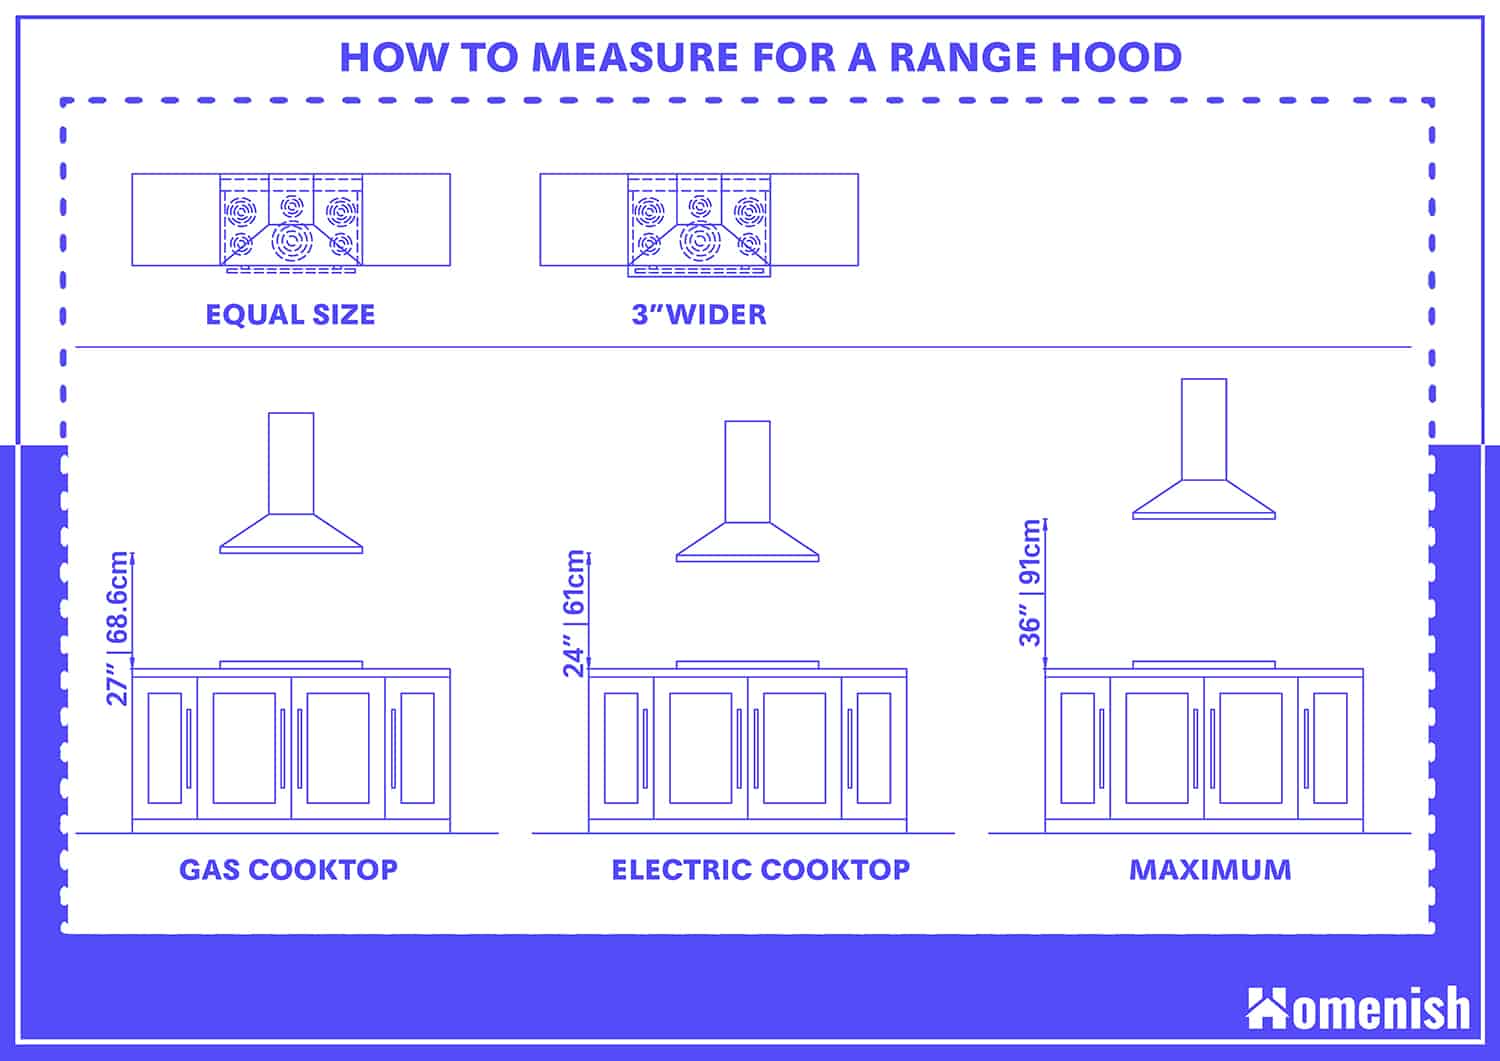 How to Measure for a Range Hood